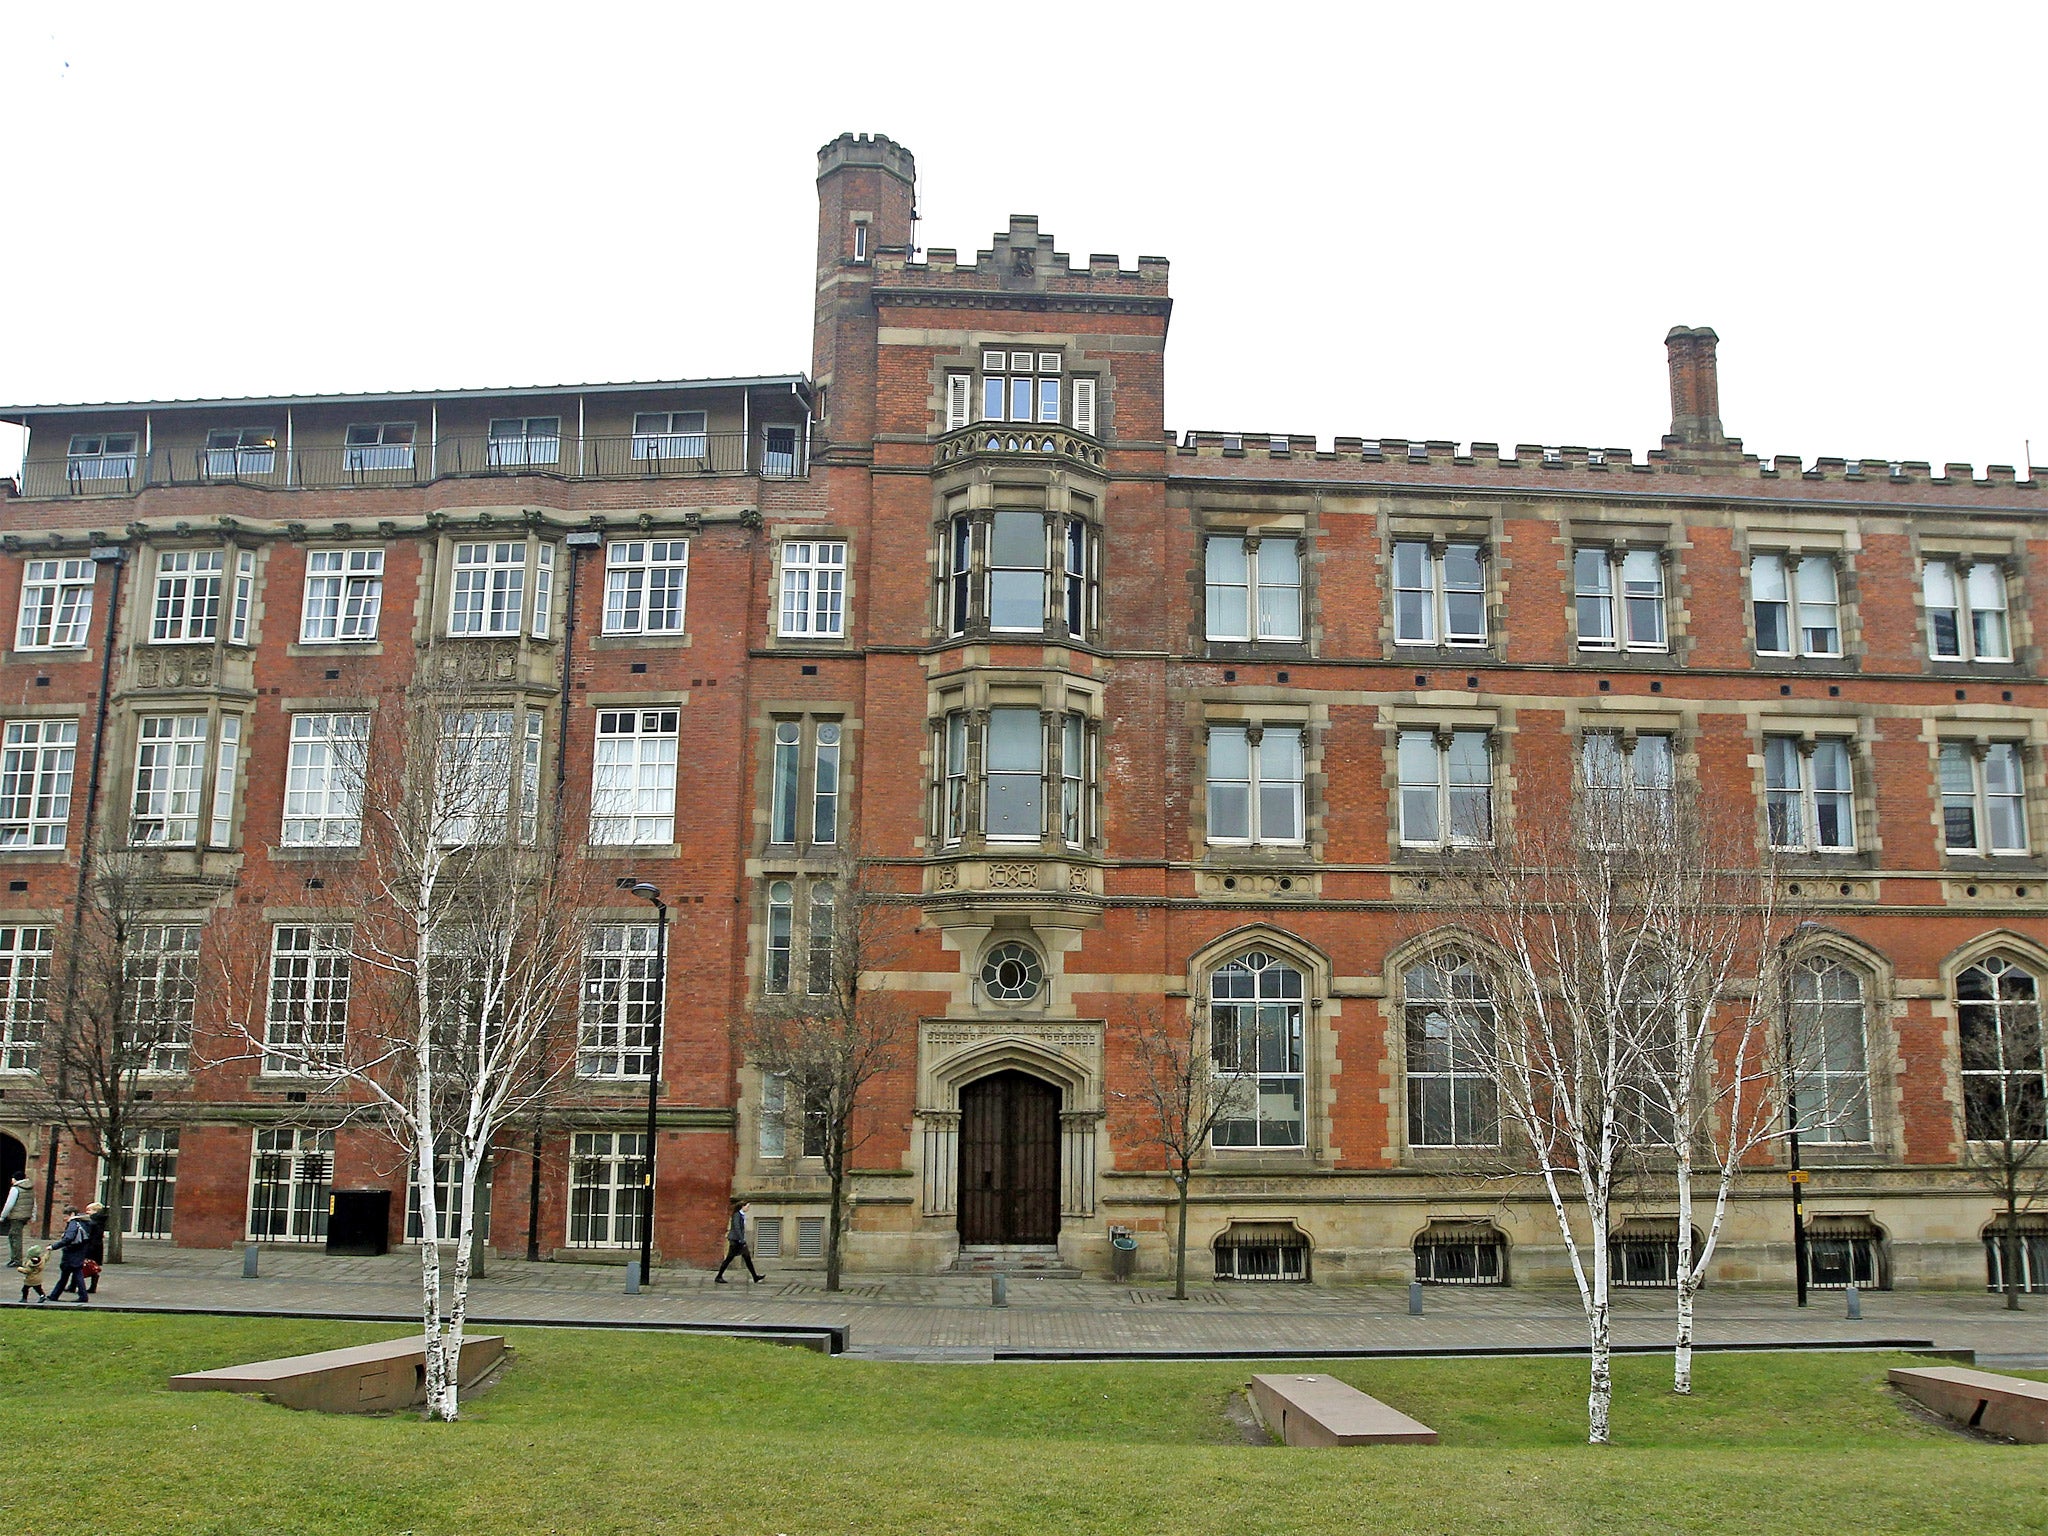 Chetham's School of Music. The majority of the offences are said to have taken place from the 1970s to the 1990s